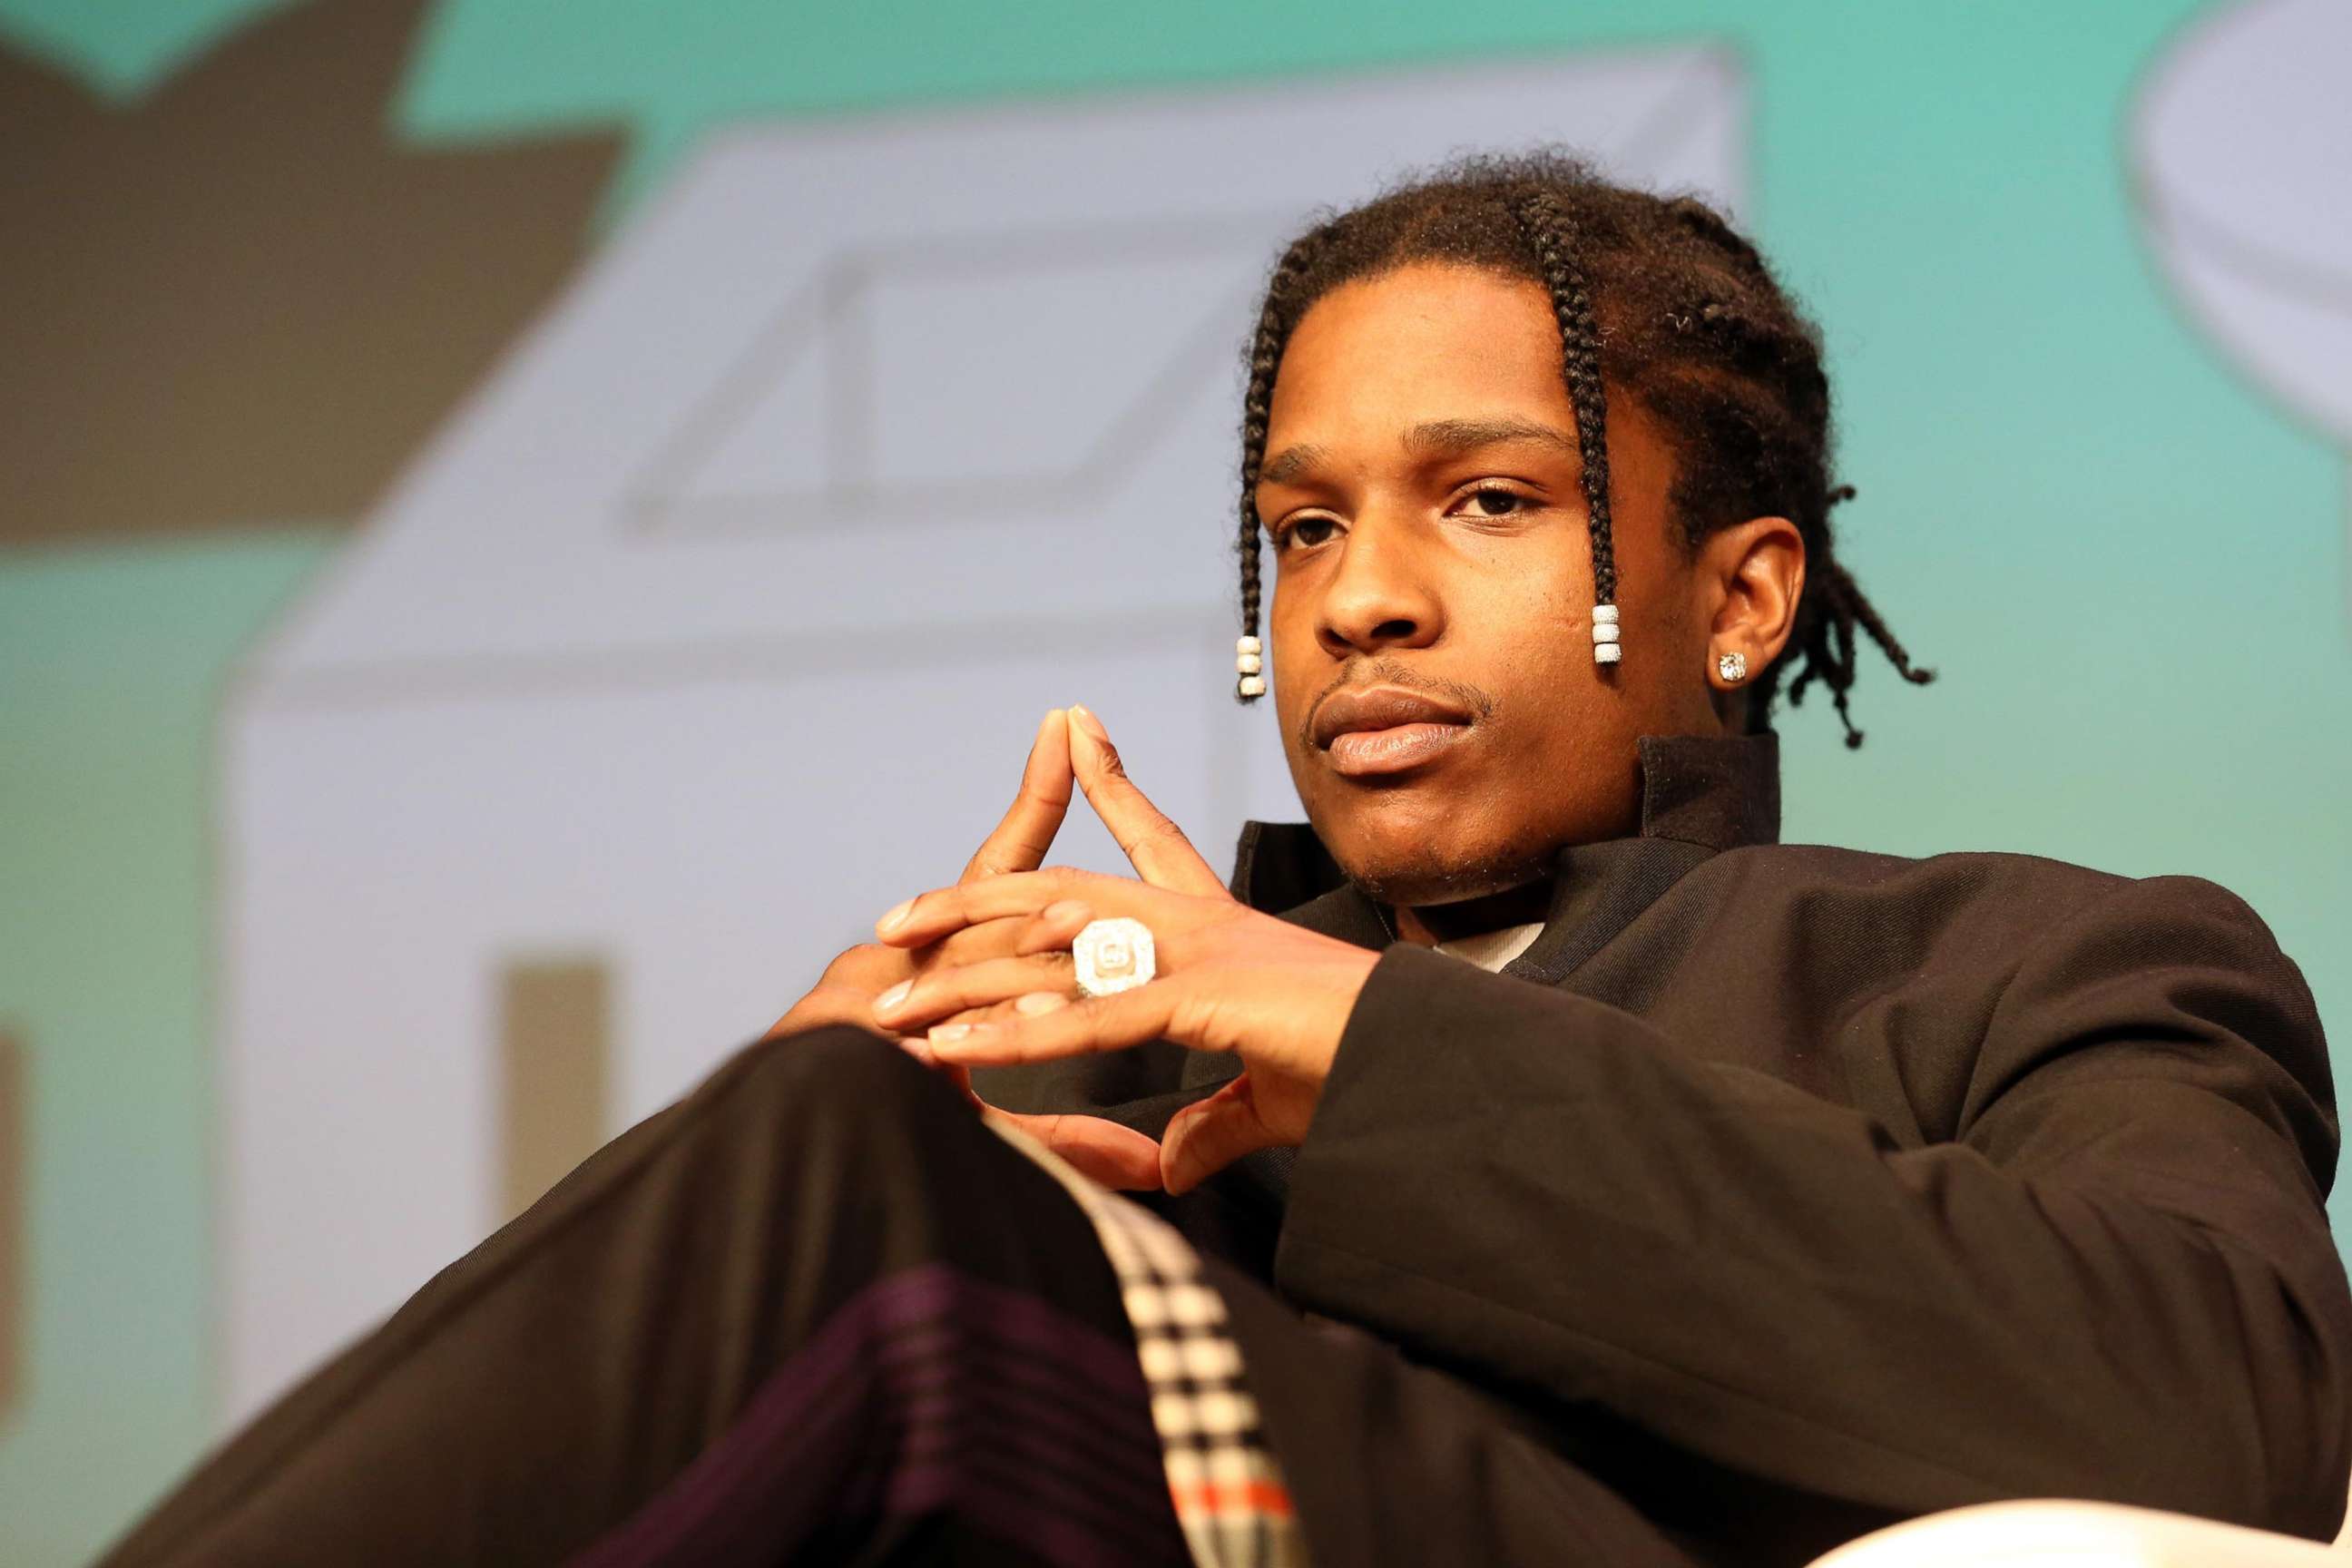 PHOTO: ASAP Rocky speaks onstage at Featured Session: Using Design "Differently" to Make a Difference during the 2019 SXSW Conference and Festivals, March 11, 2019, in Austin, Texas.